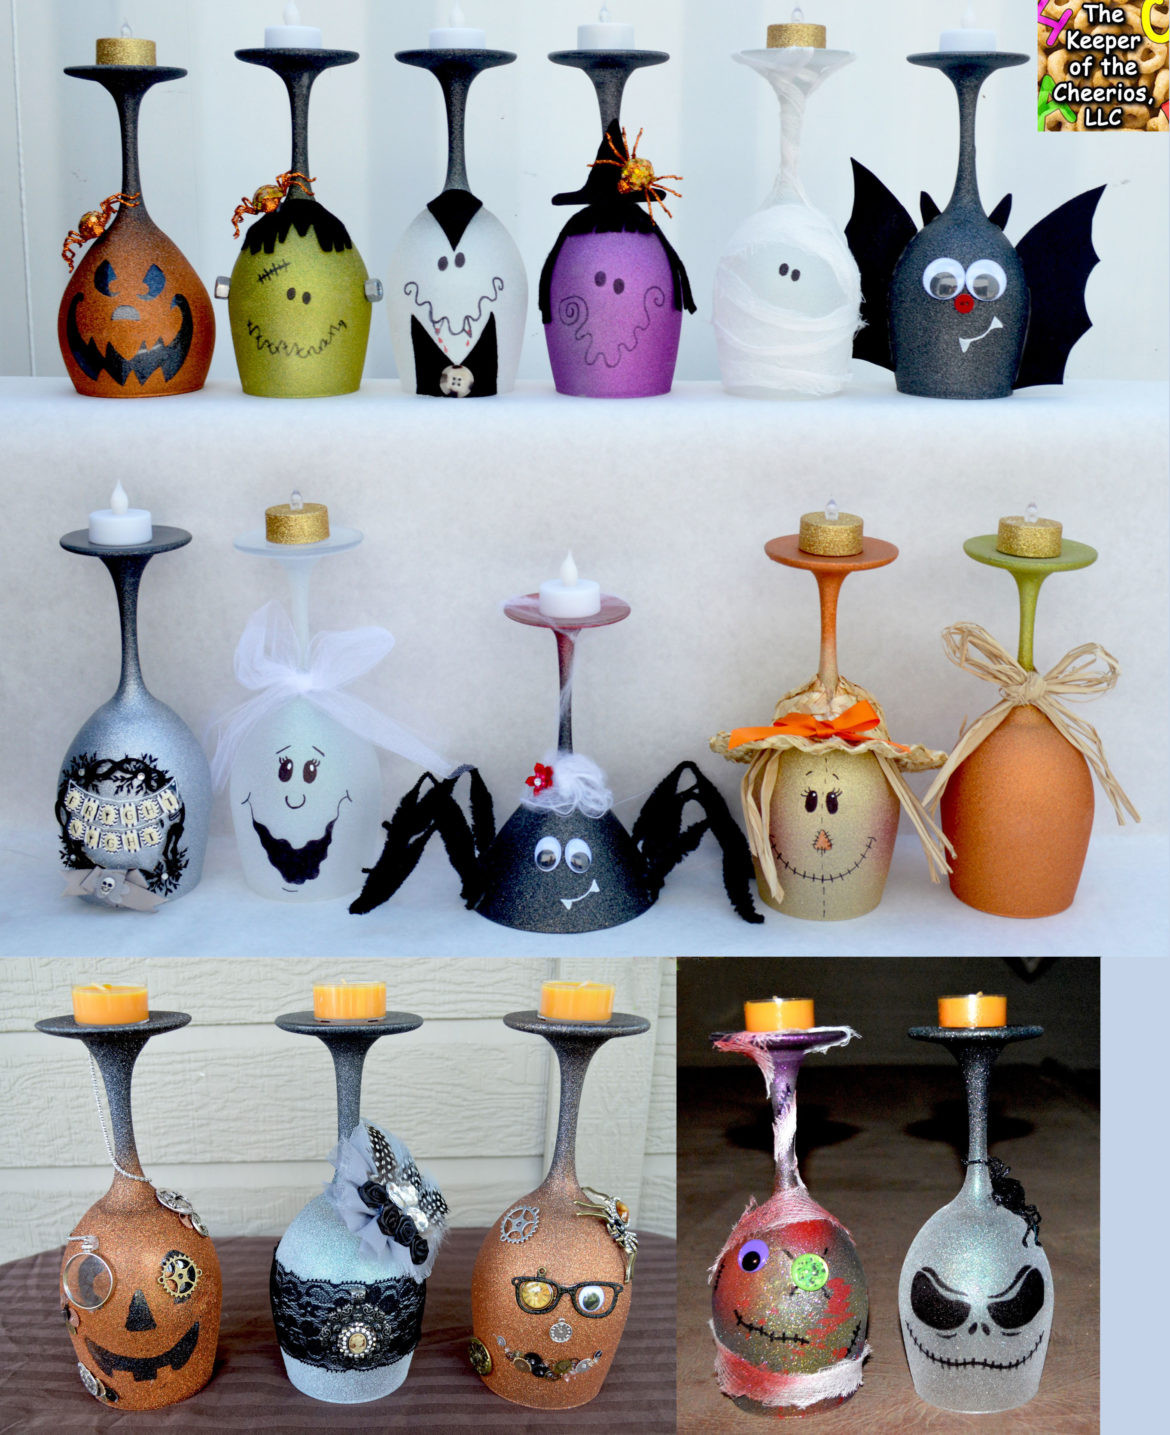 Halloween Craft Ideas For Adults
 HALLOWEEN WINE GLASS CANDLE HOLDERS The Keeper of the